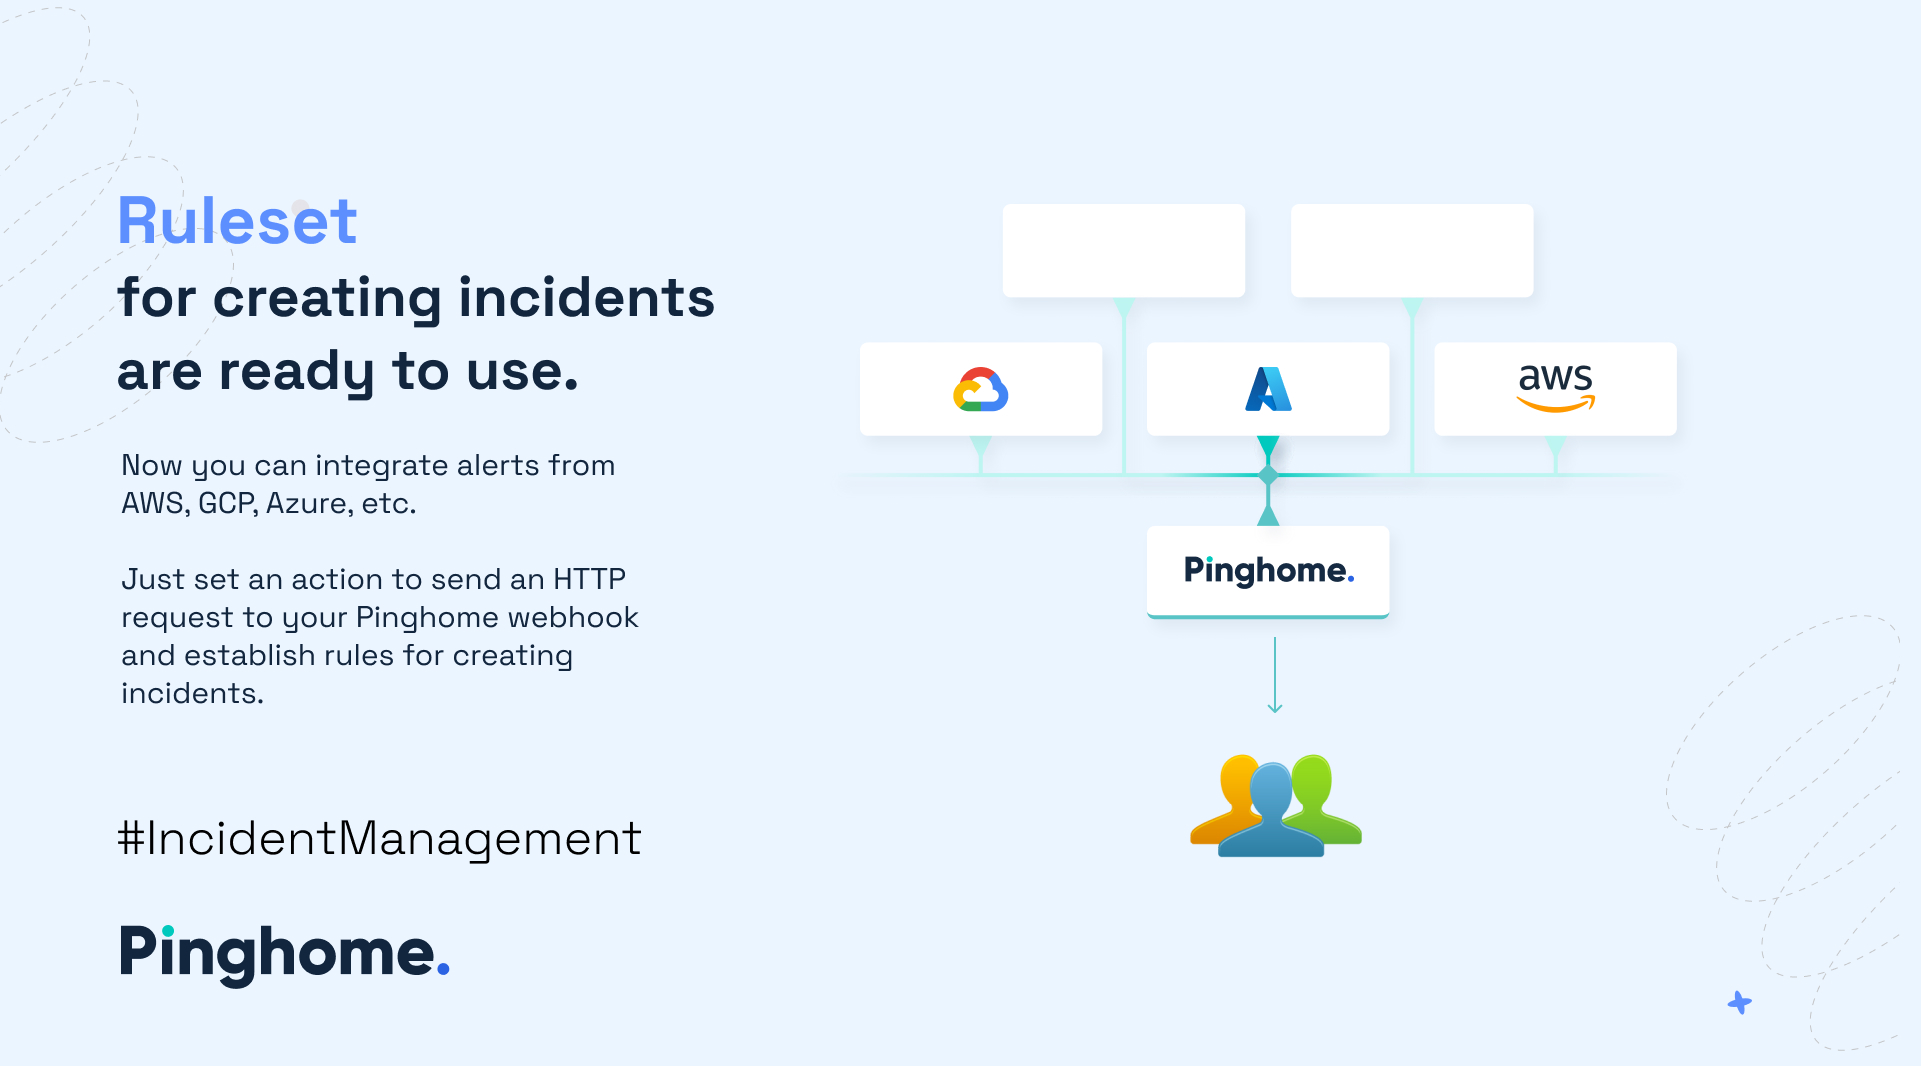 Ruleset for creating incidents at Pinghome